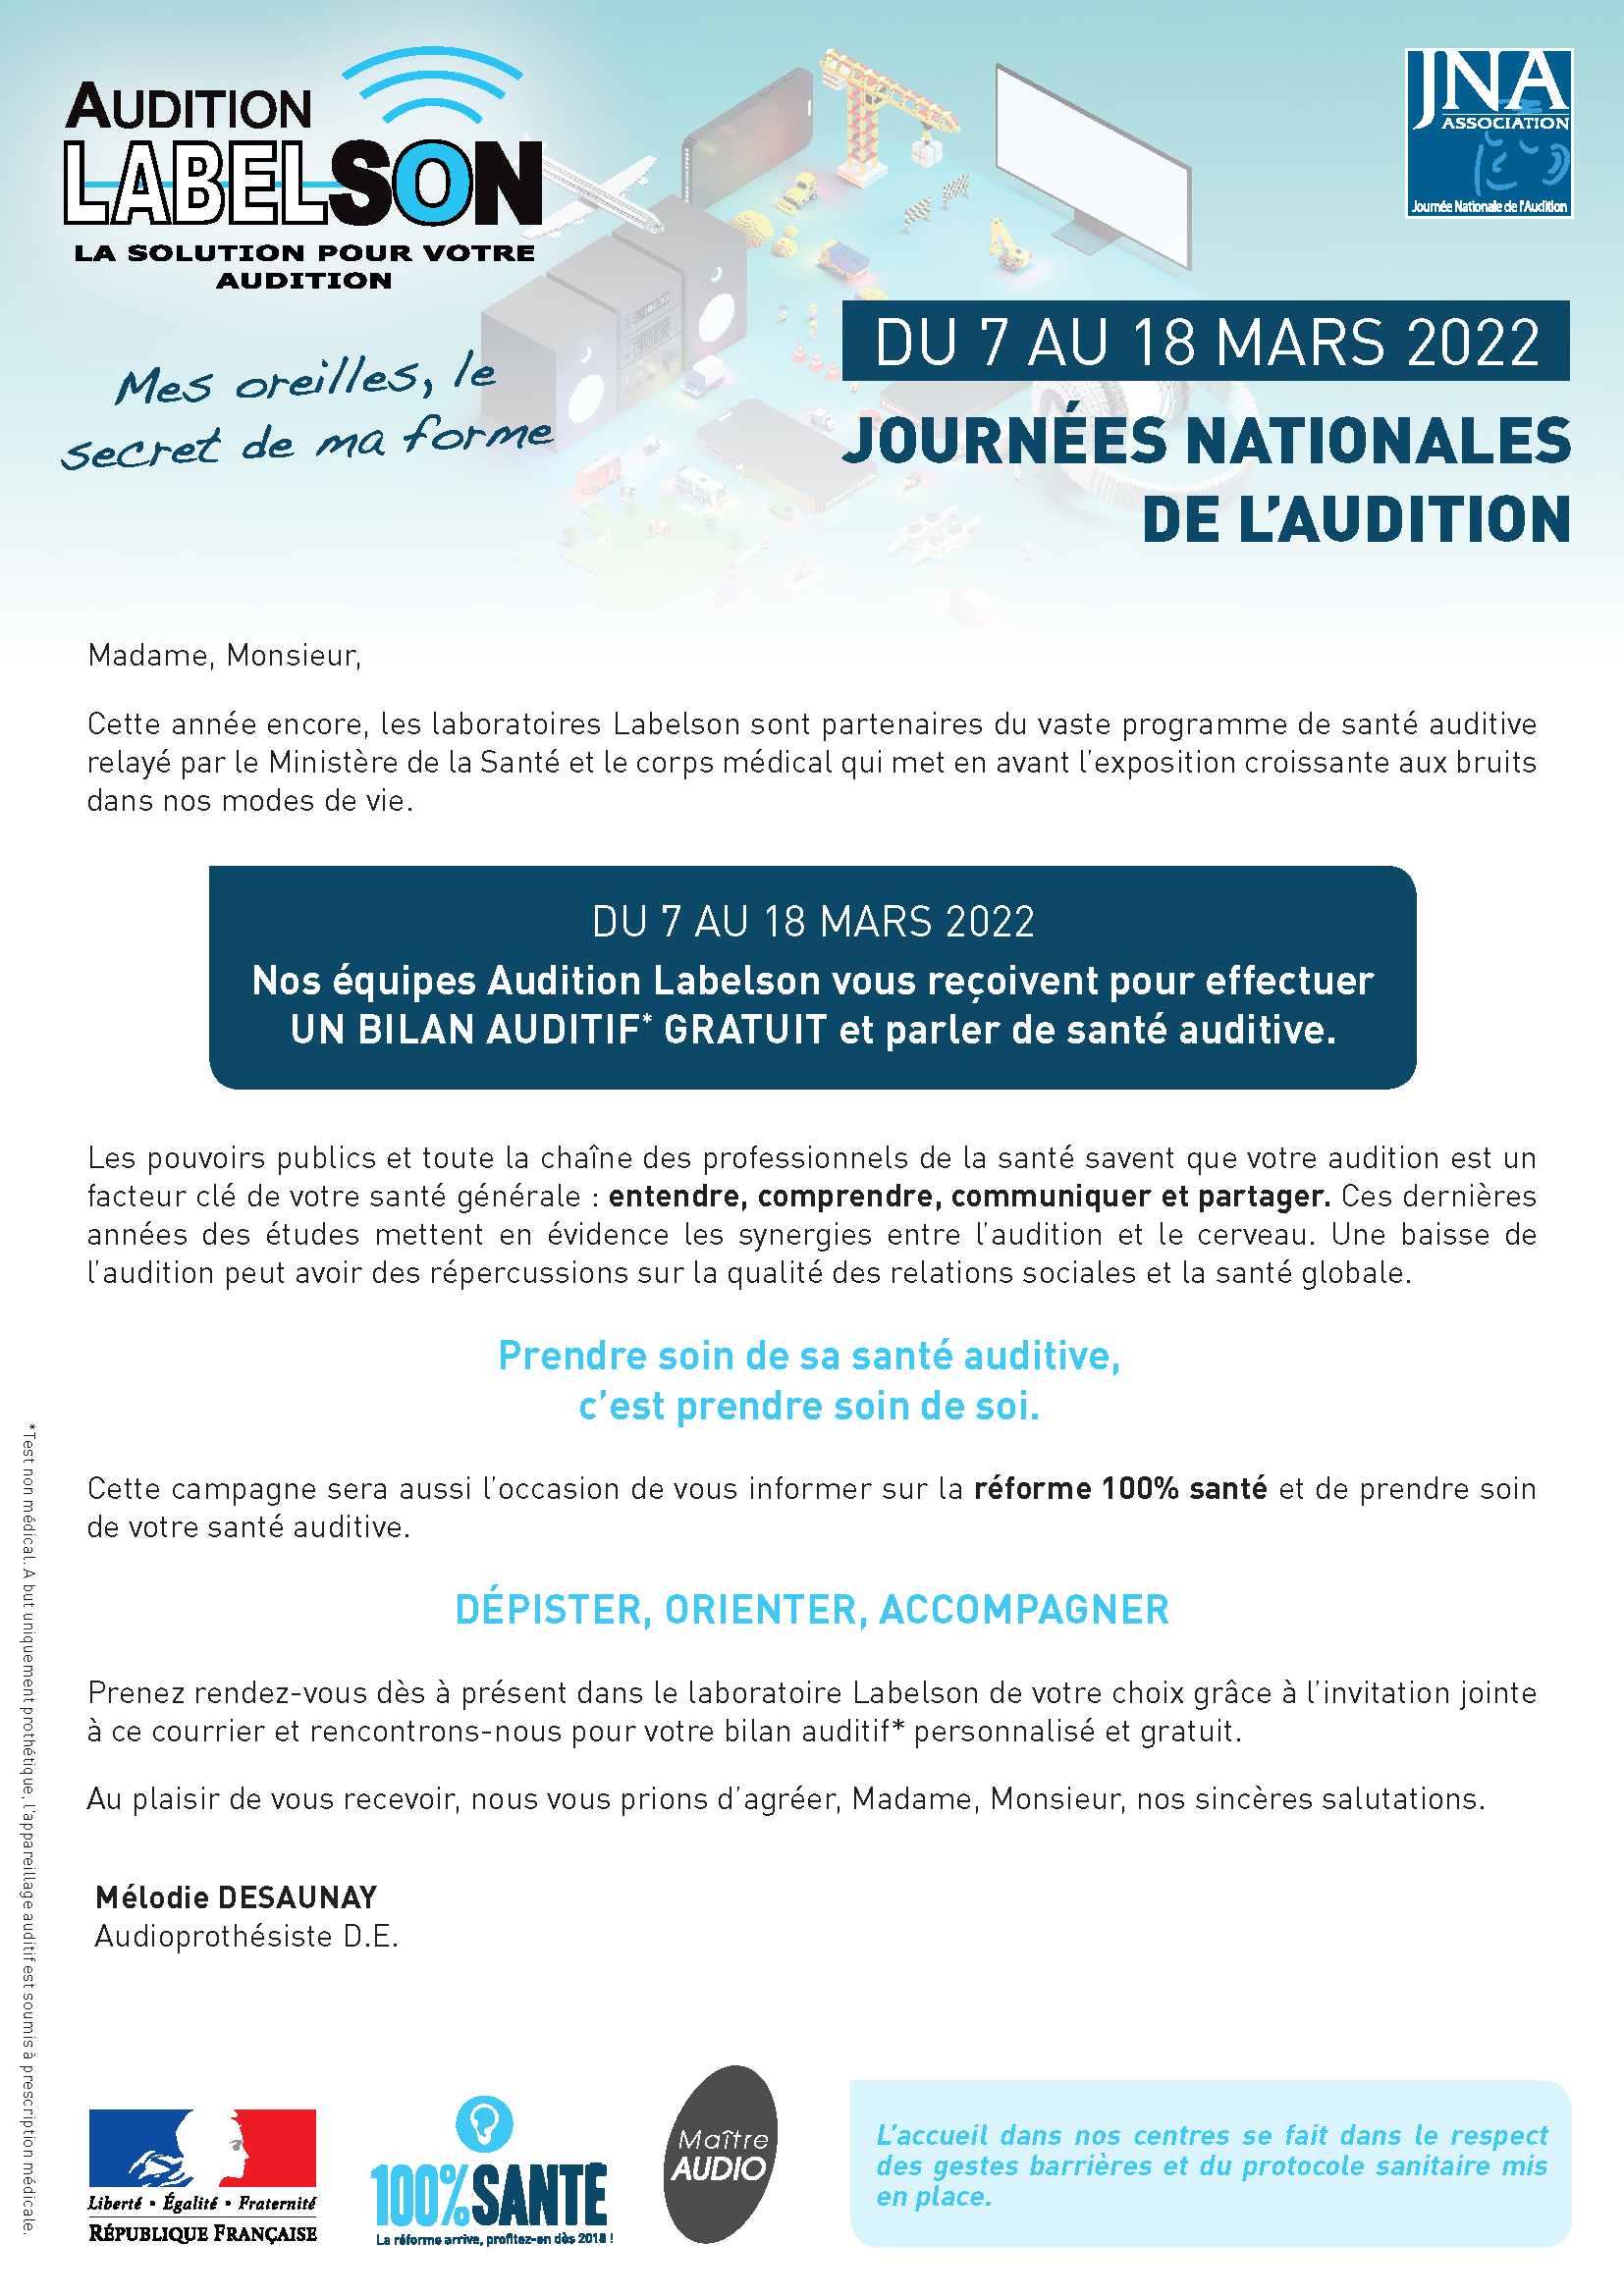 JNA 2022 AUDITION LABELSON PAYS BASQUE